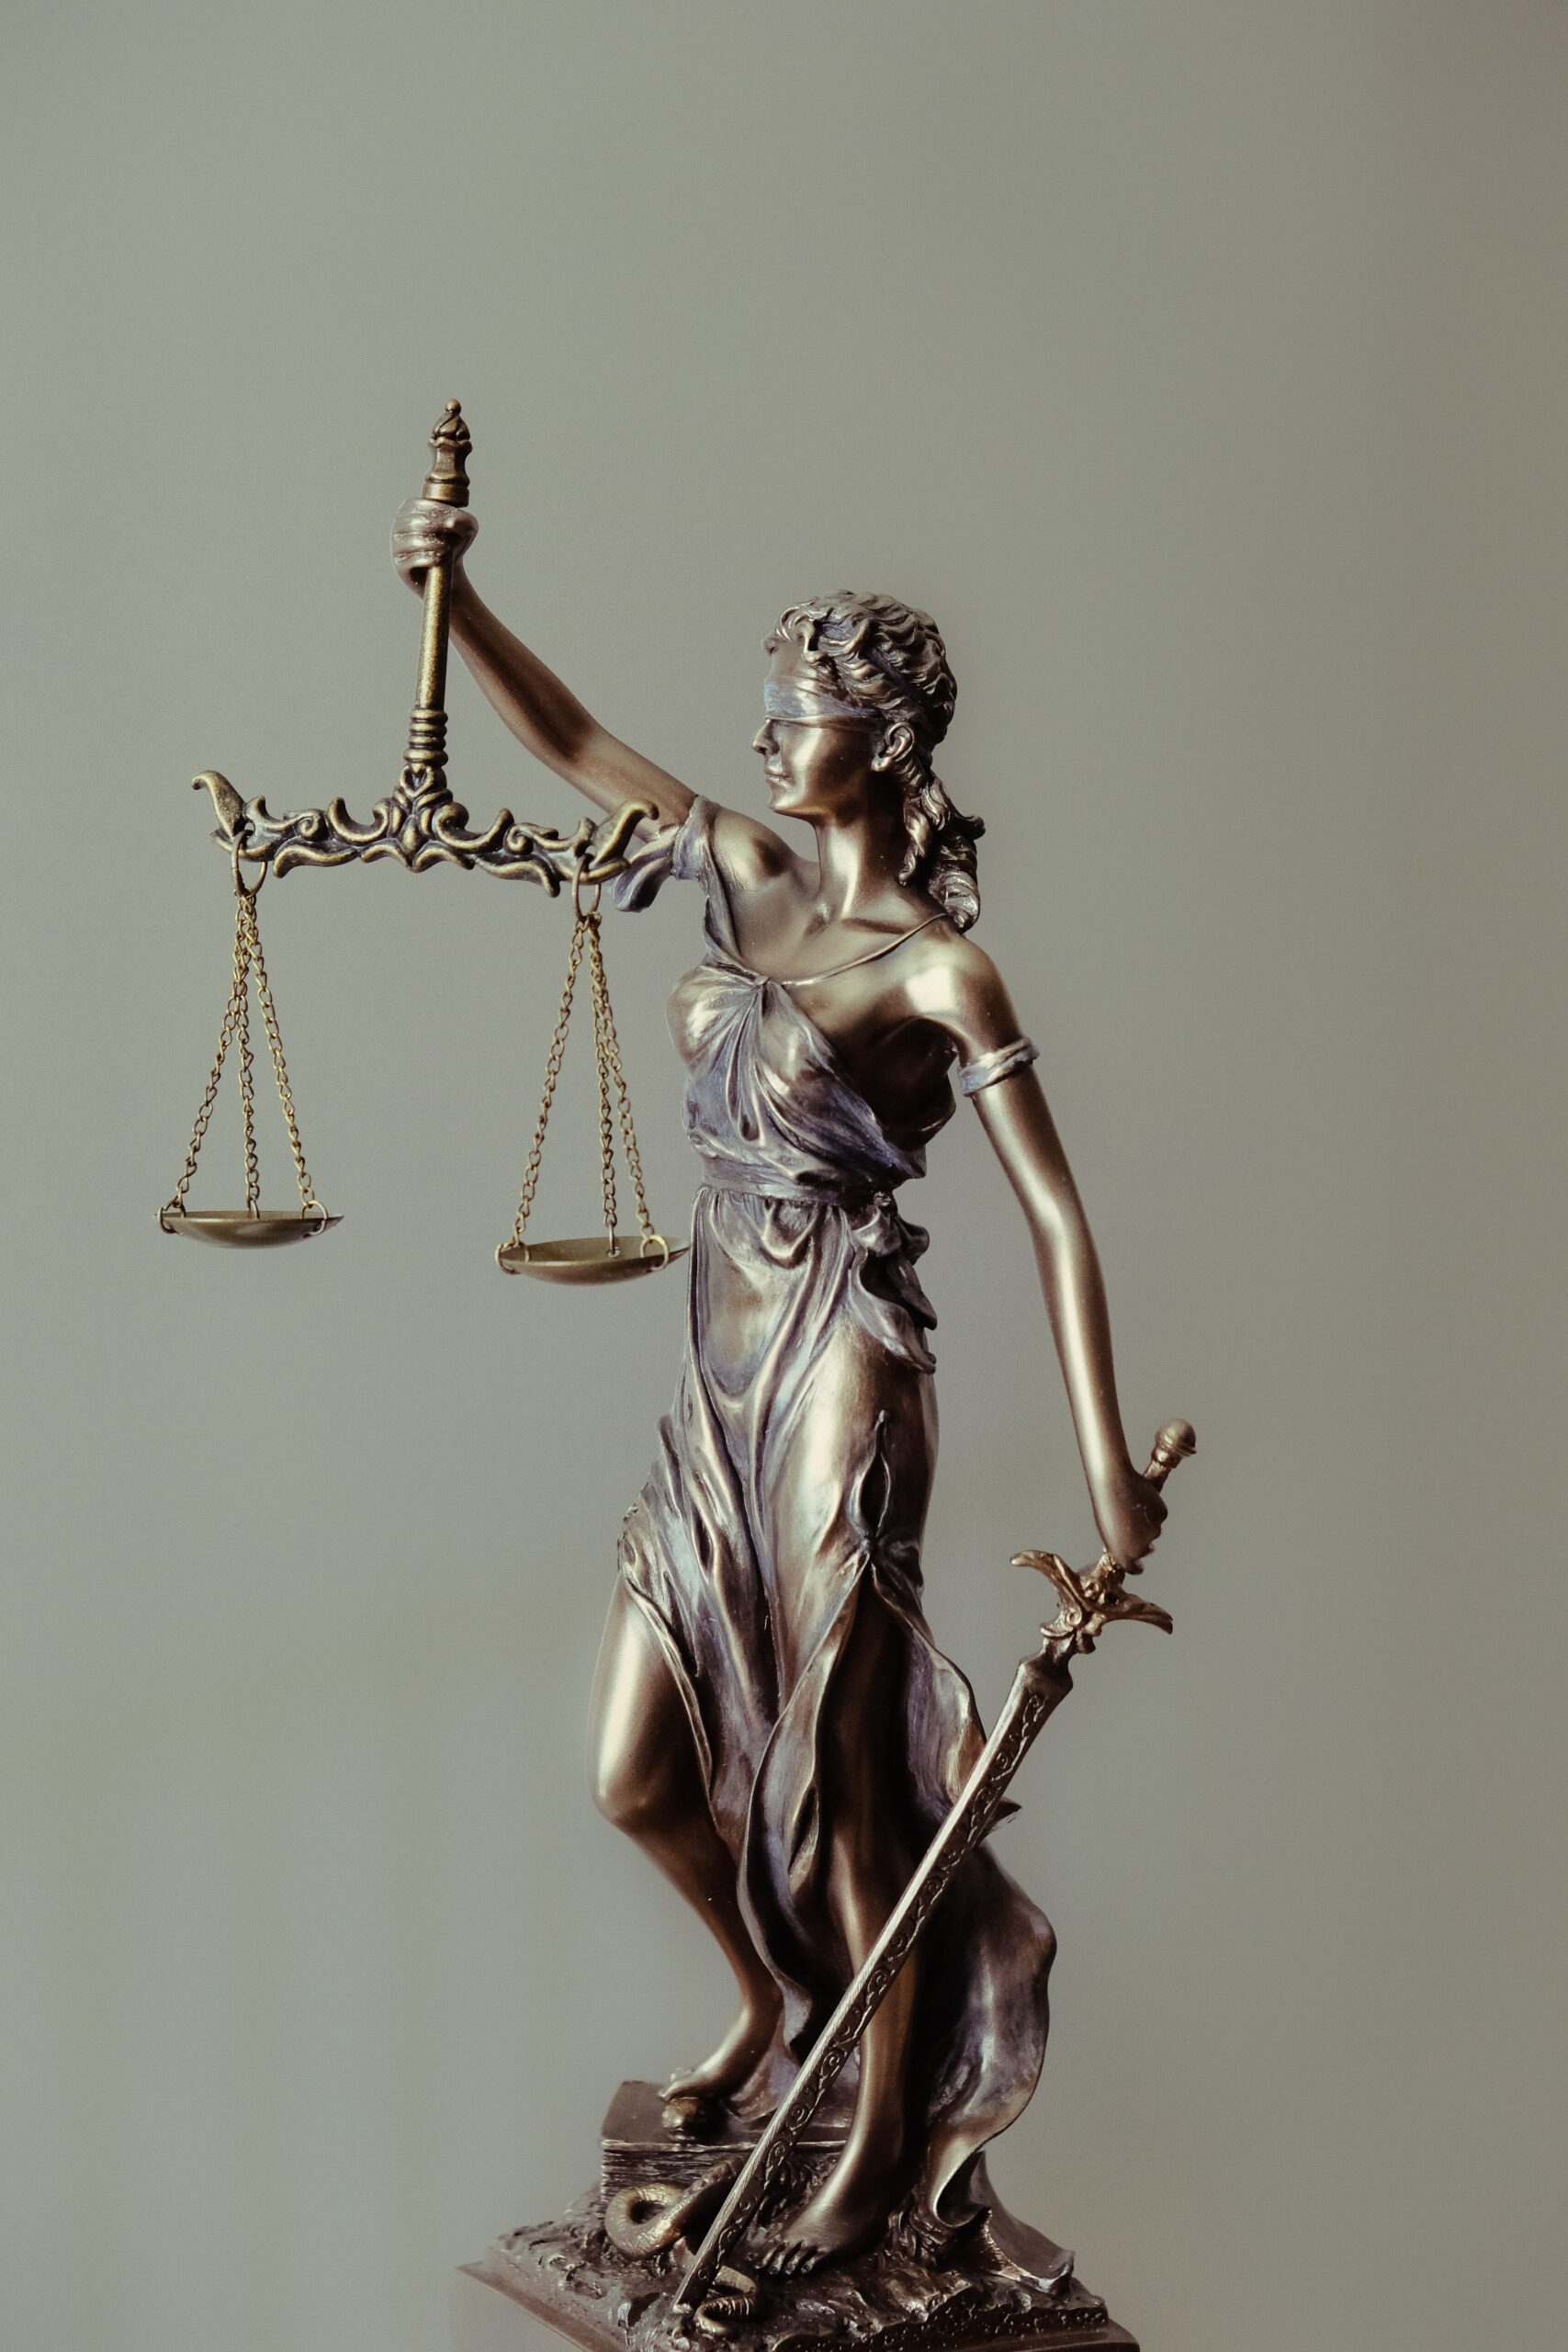 Blind-folded Gold Lady Justice Holding Sword in Left Hand and Scales of Justice in Right